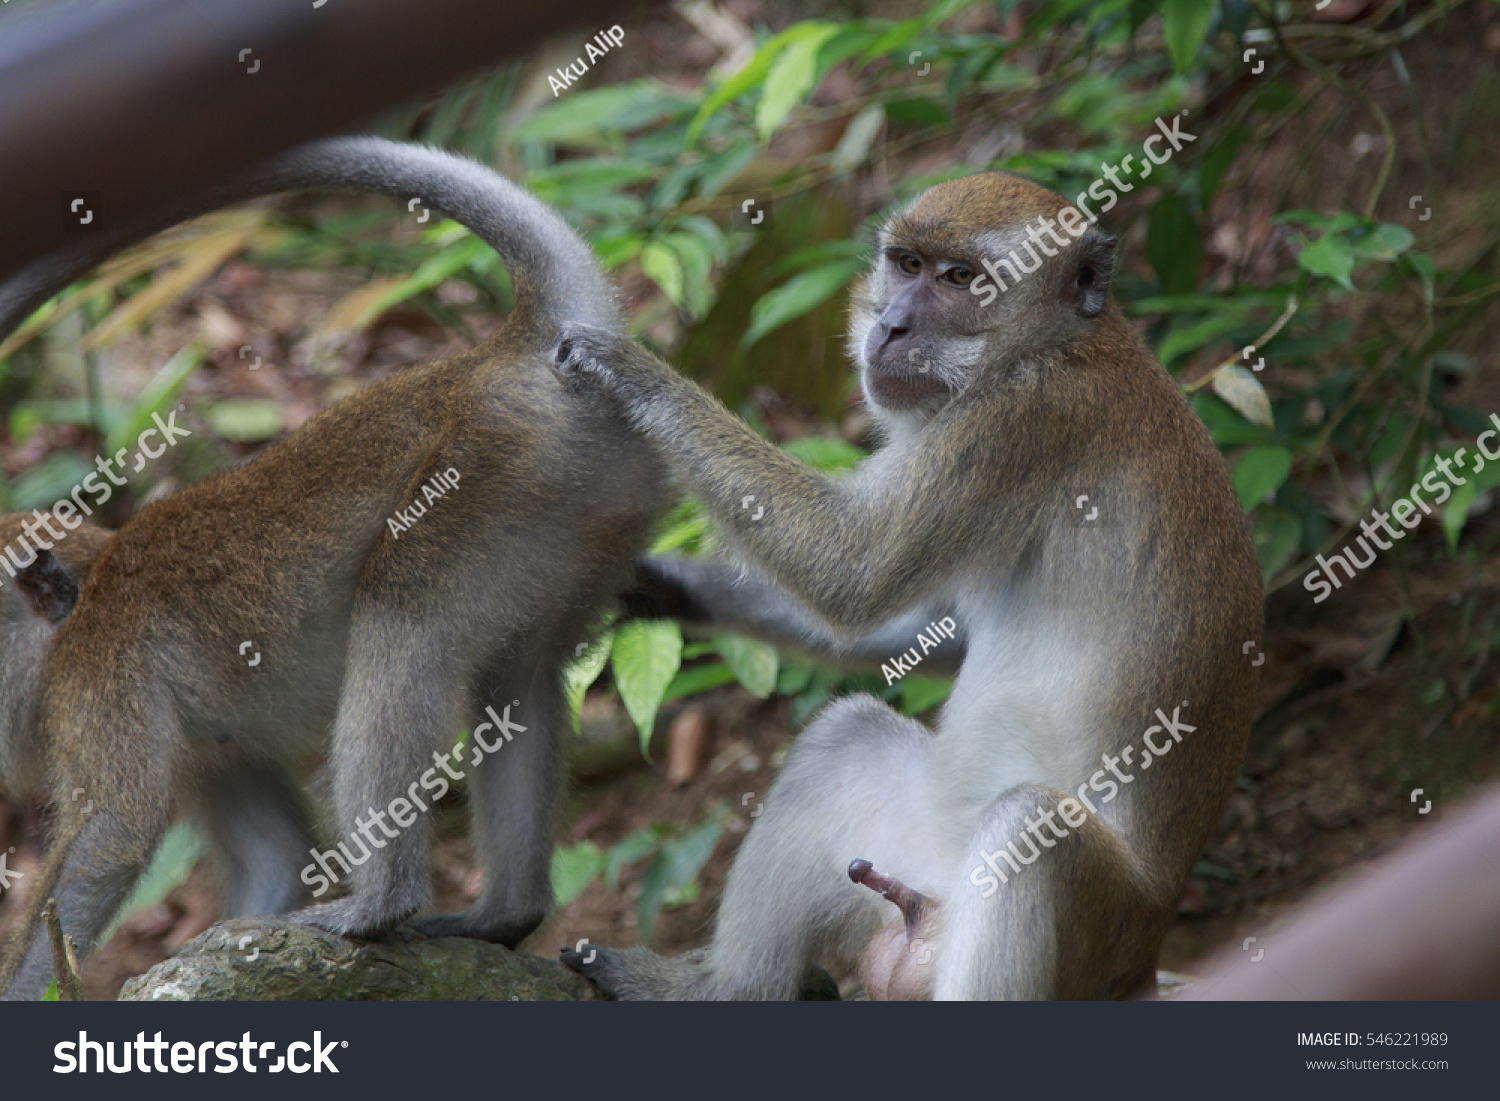 Monkey Smelling Each Other Butt One Stock Photo 546221989 Shutterstock.